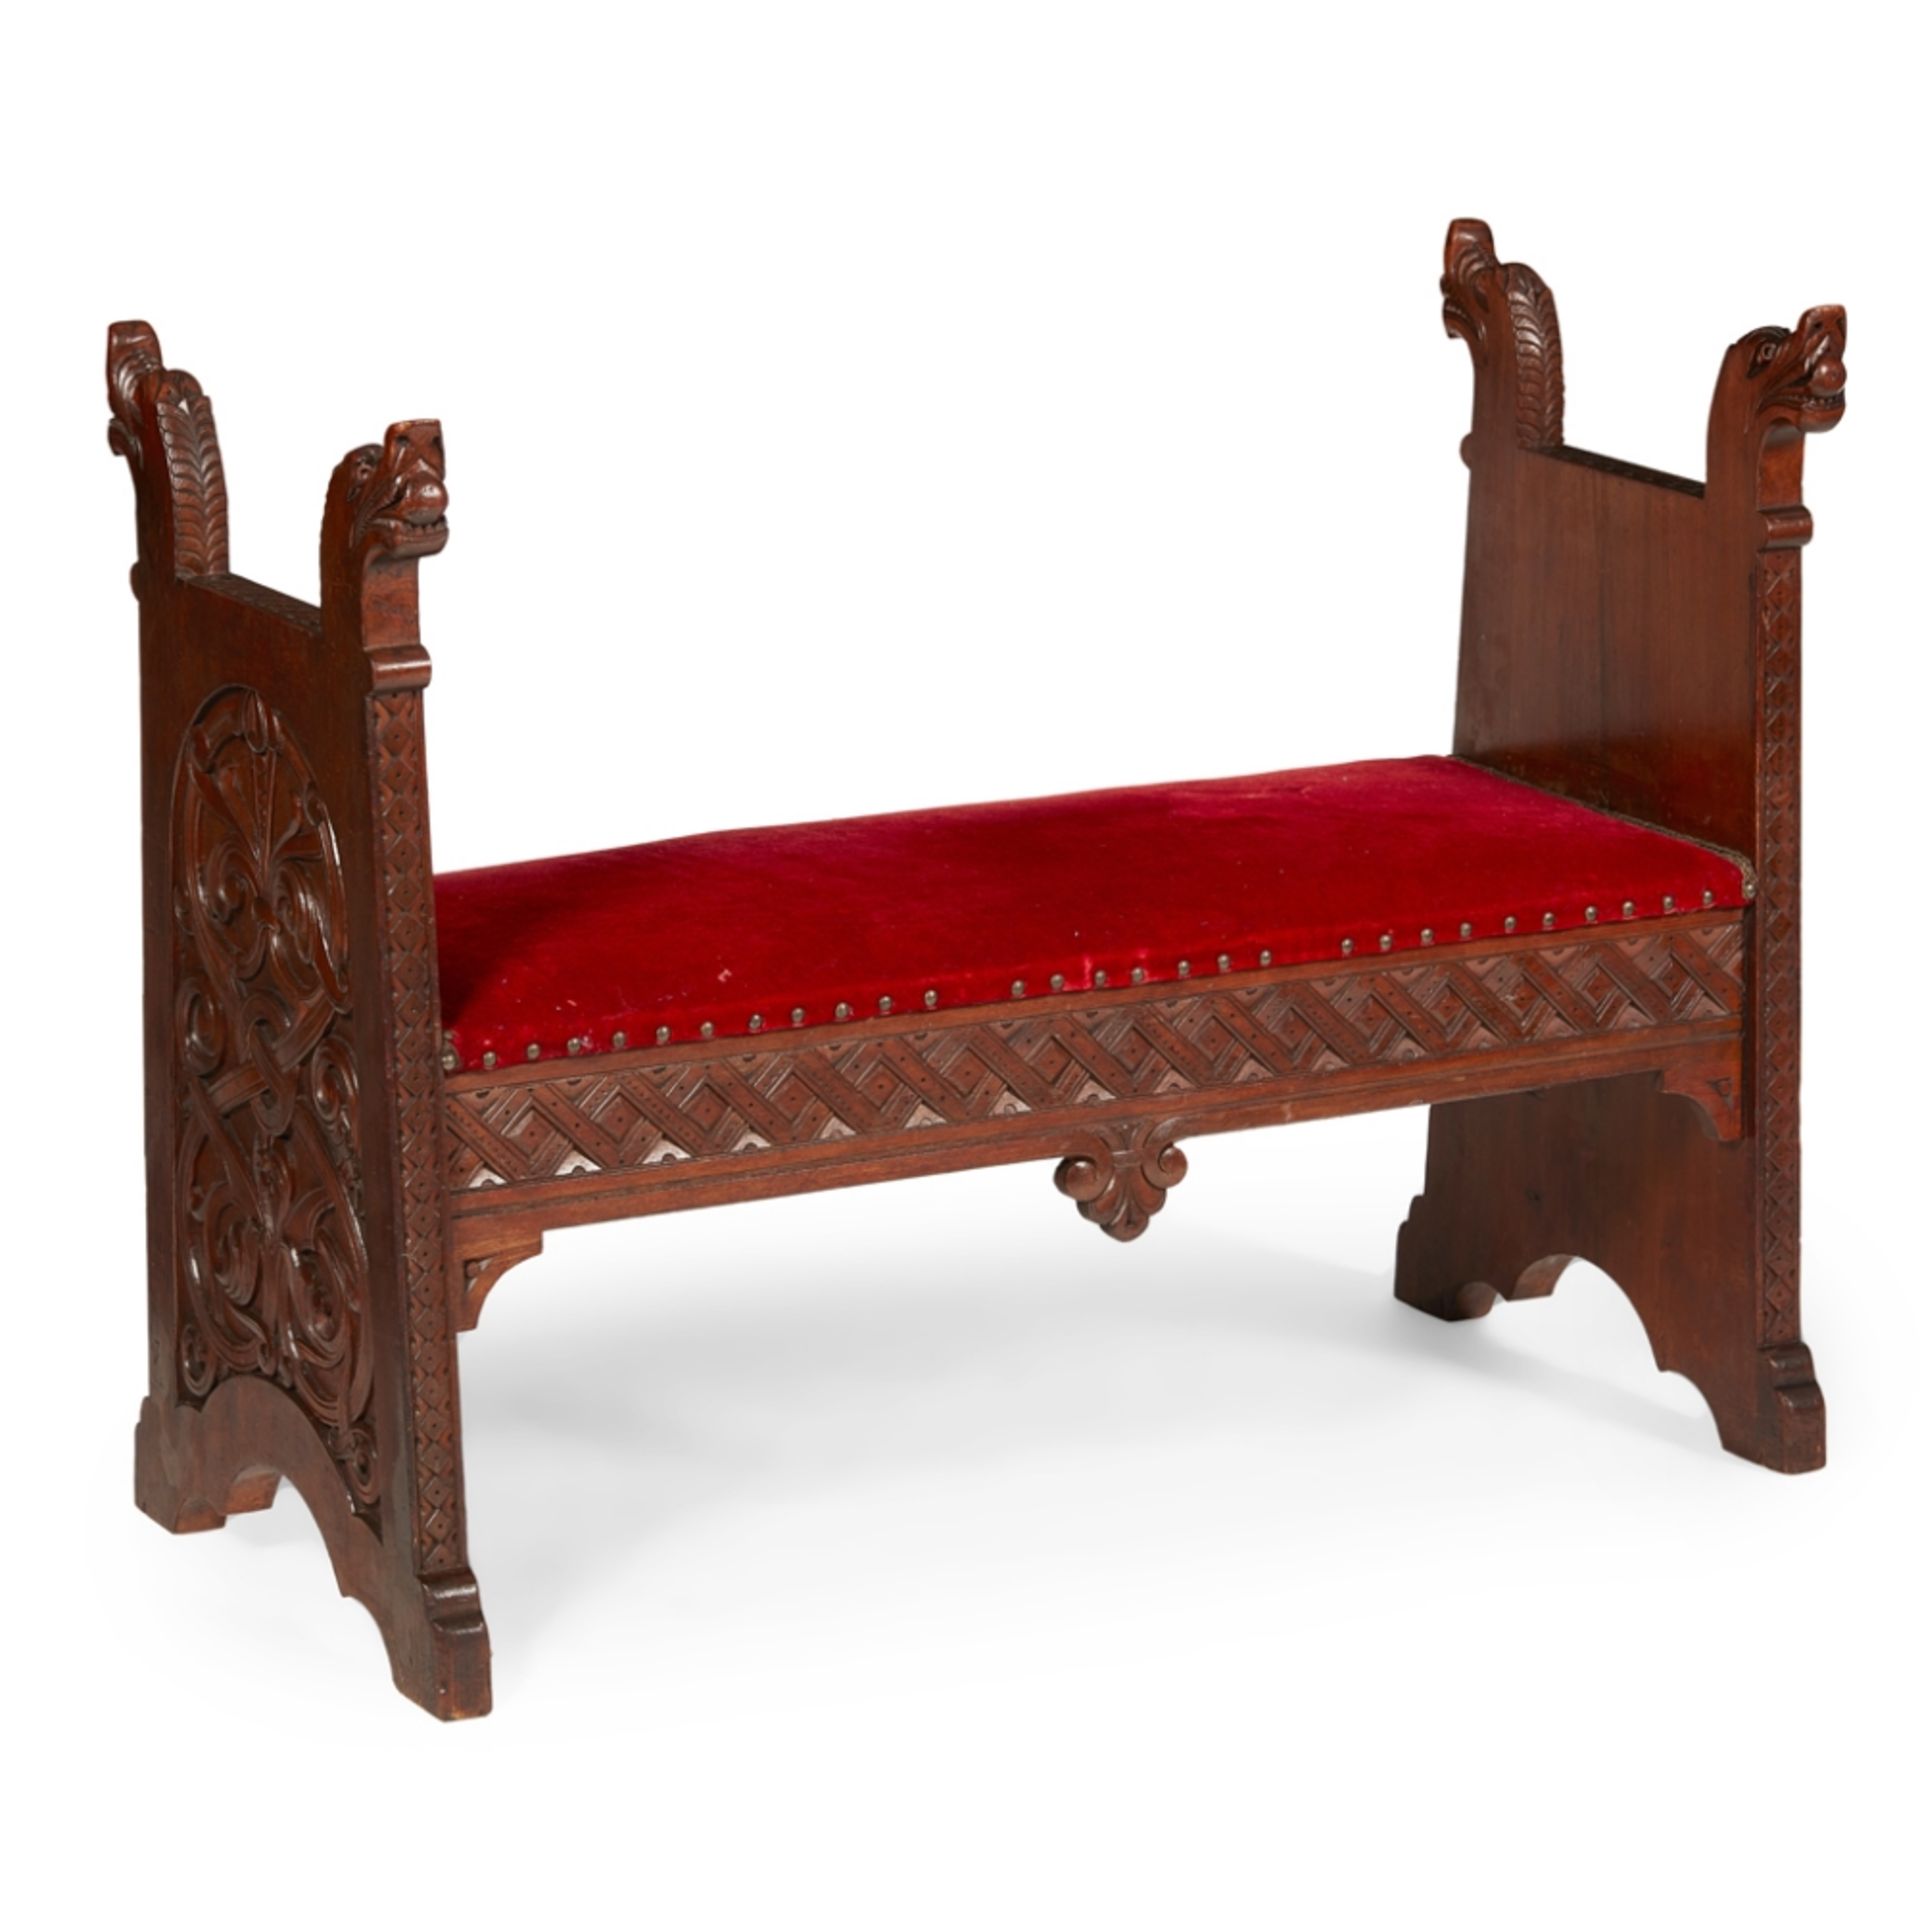 NORWEGIAN SCHOOLARTS & CRAFTS VIKING REVIVAL STAINED PINE BENCH, CIRCA 1900 with original close-nail